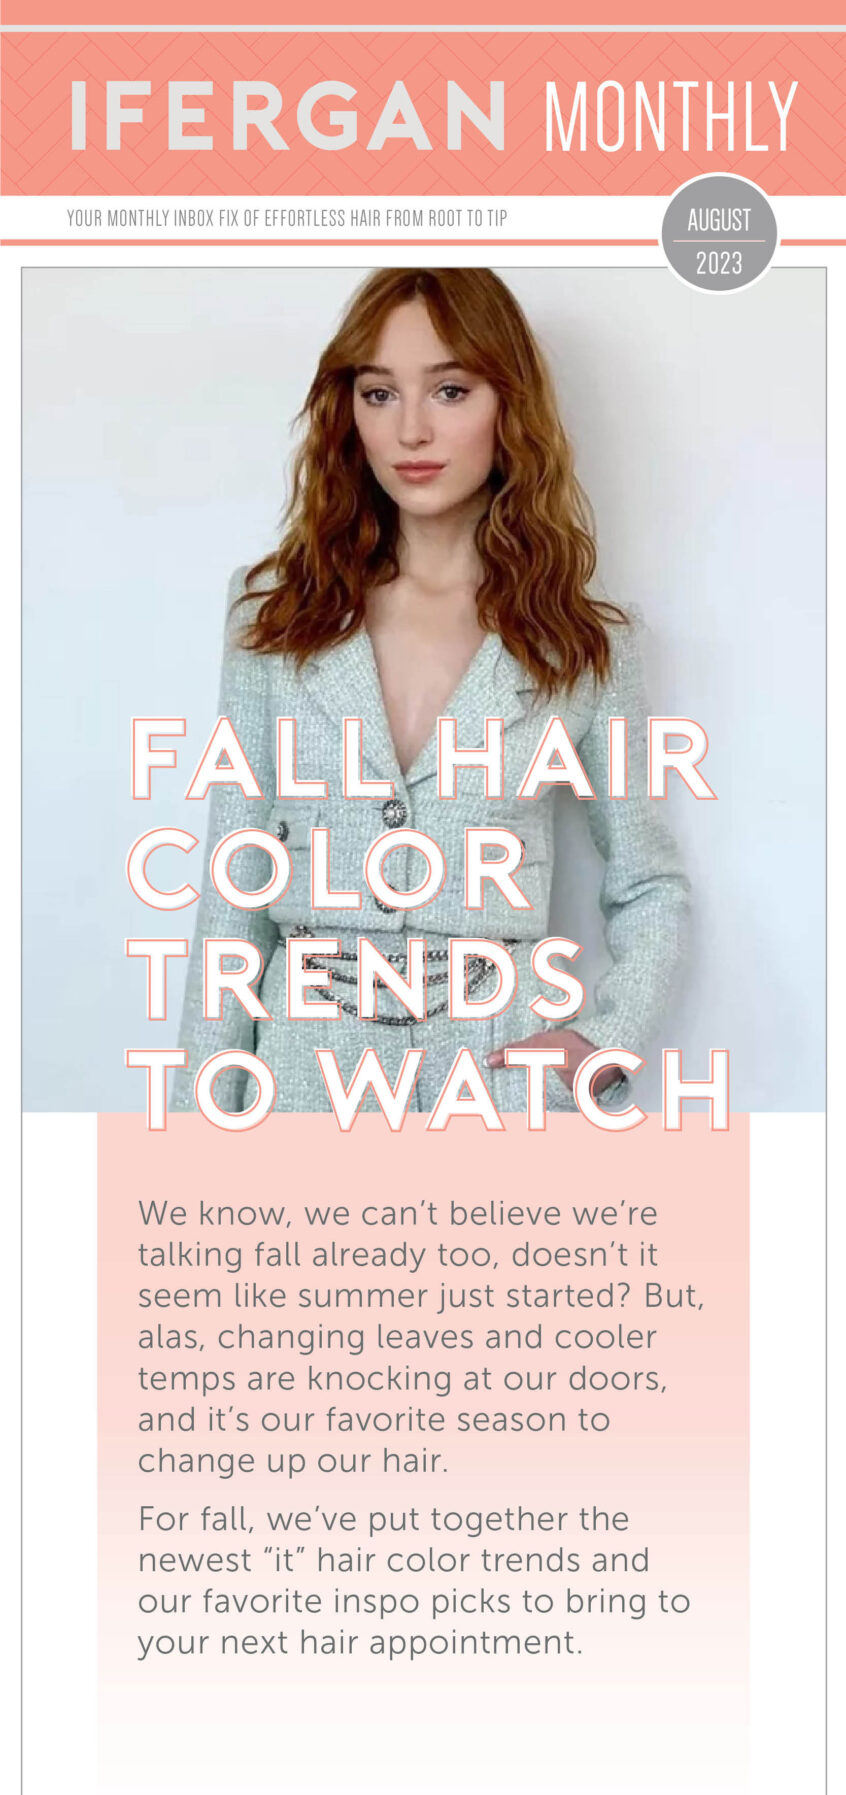 August 2023 Newsletter - Fall hair color trends to watch